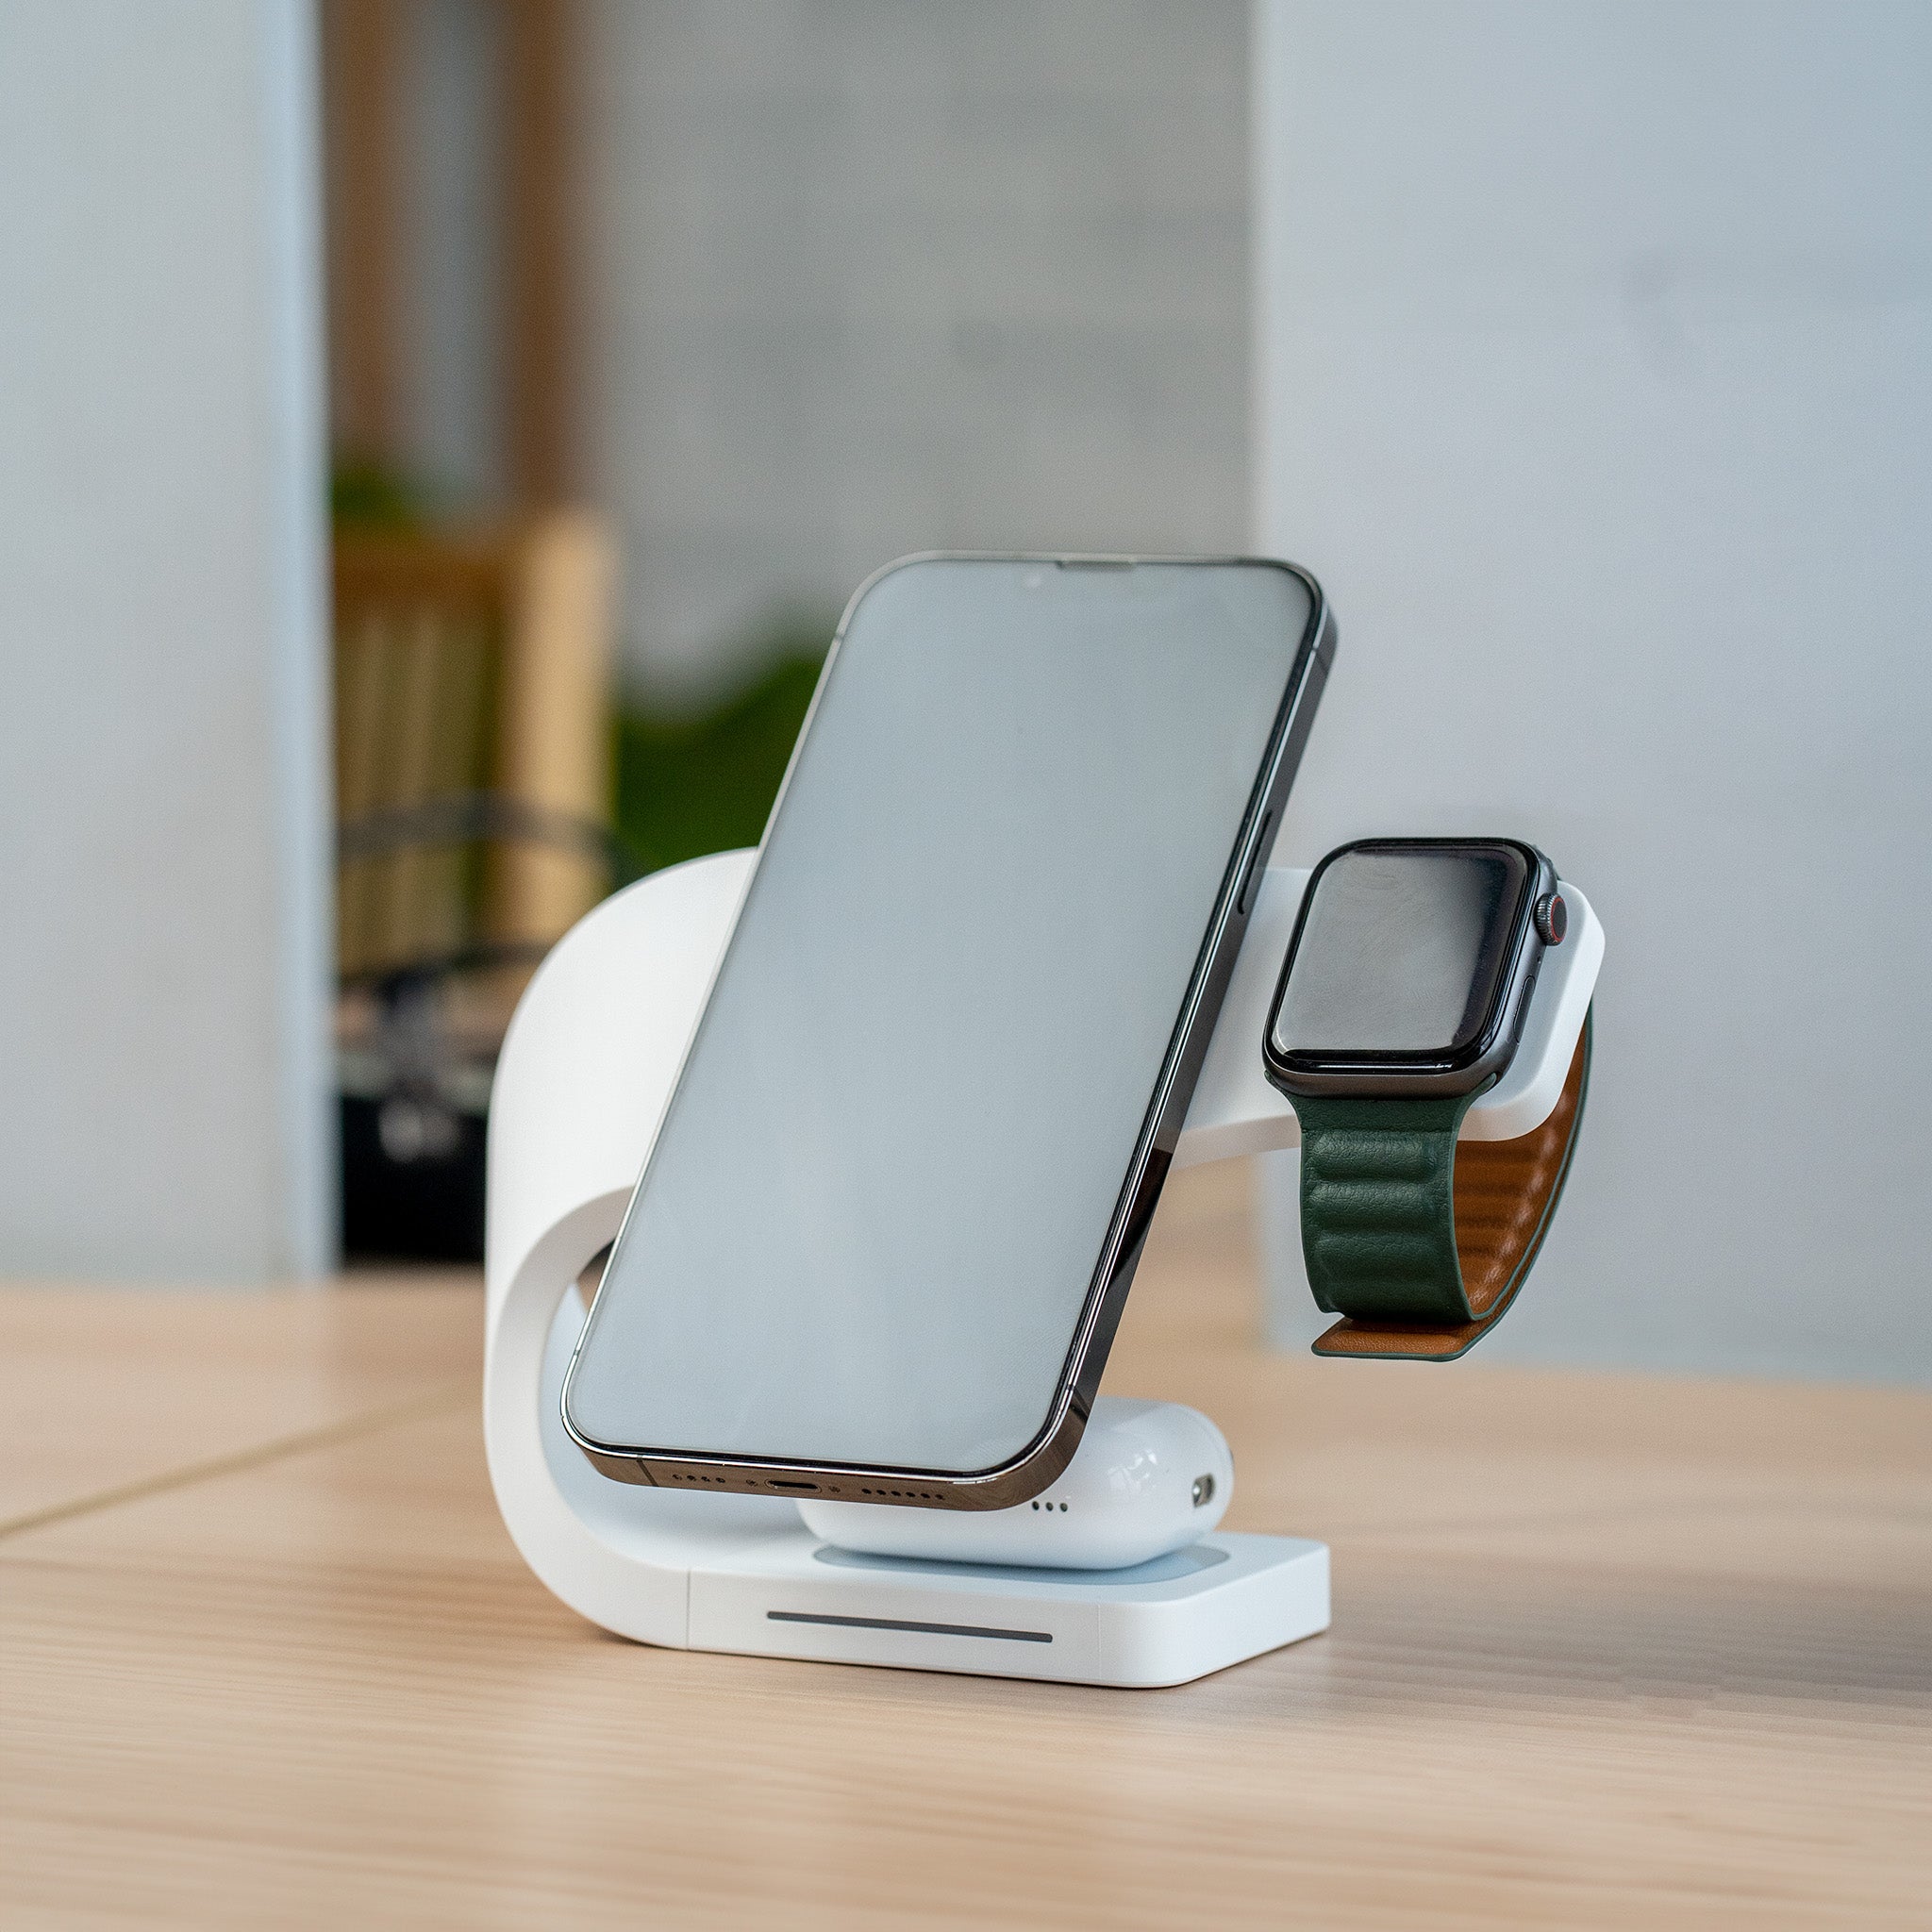 An iPhone and Apple Watch are charging on a Simpli 3-in-1 Wireless Charging Station in Ivory White, placed on a wooden desk. The charger's modern design holds the iPhone vertically and the watch on a side arm, while AirPods rest on the base.